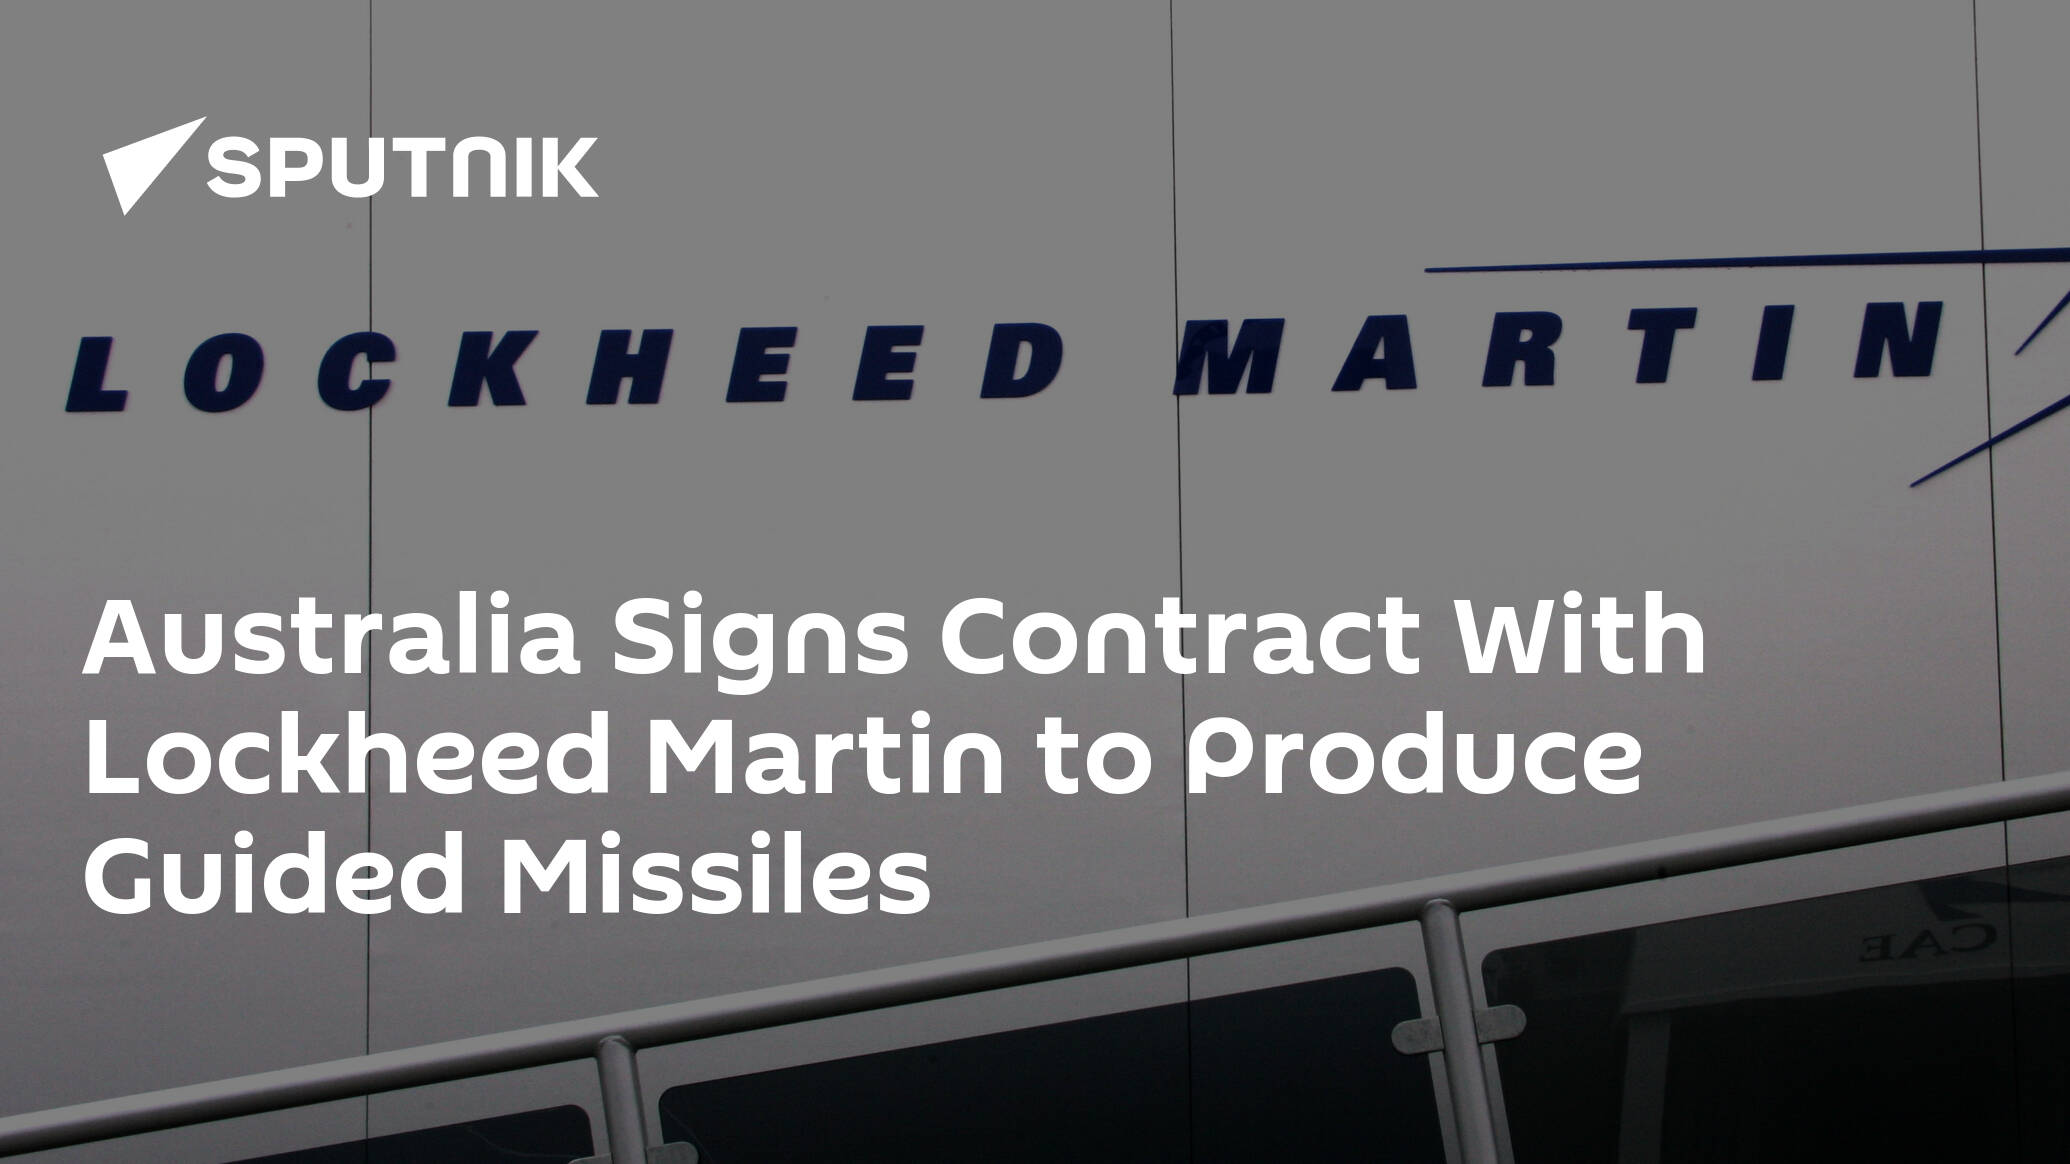 Australia Signs Contract With Lockheed Martin to Produce Guided Missiles